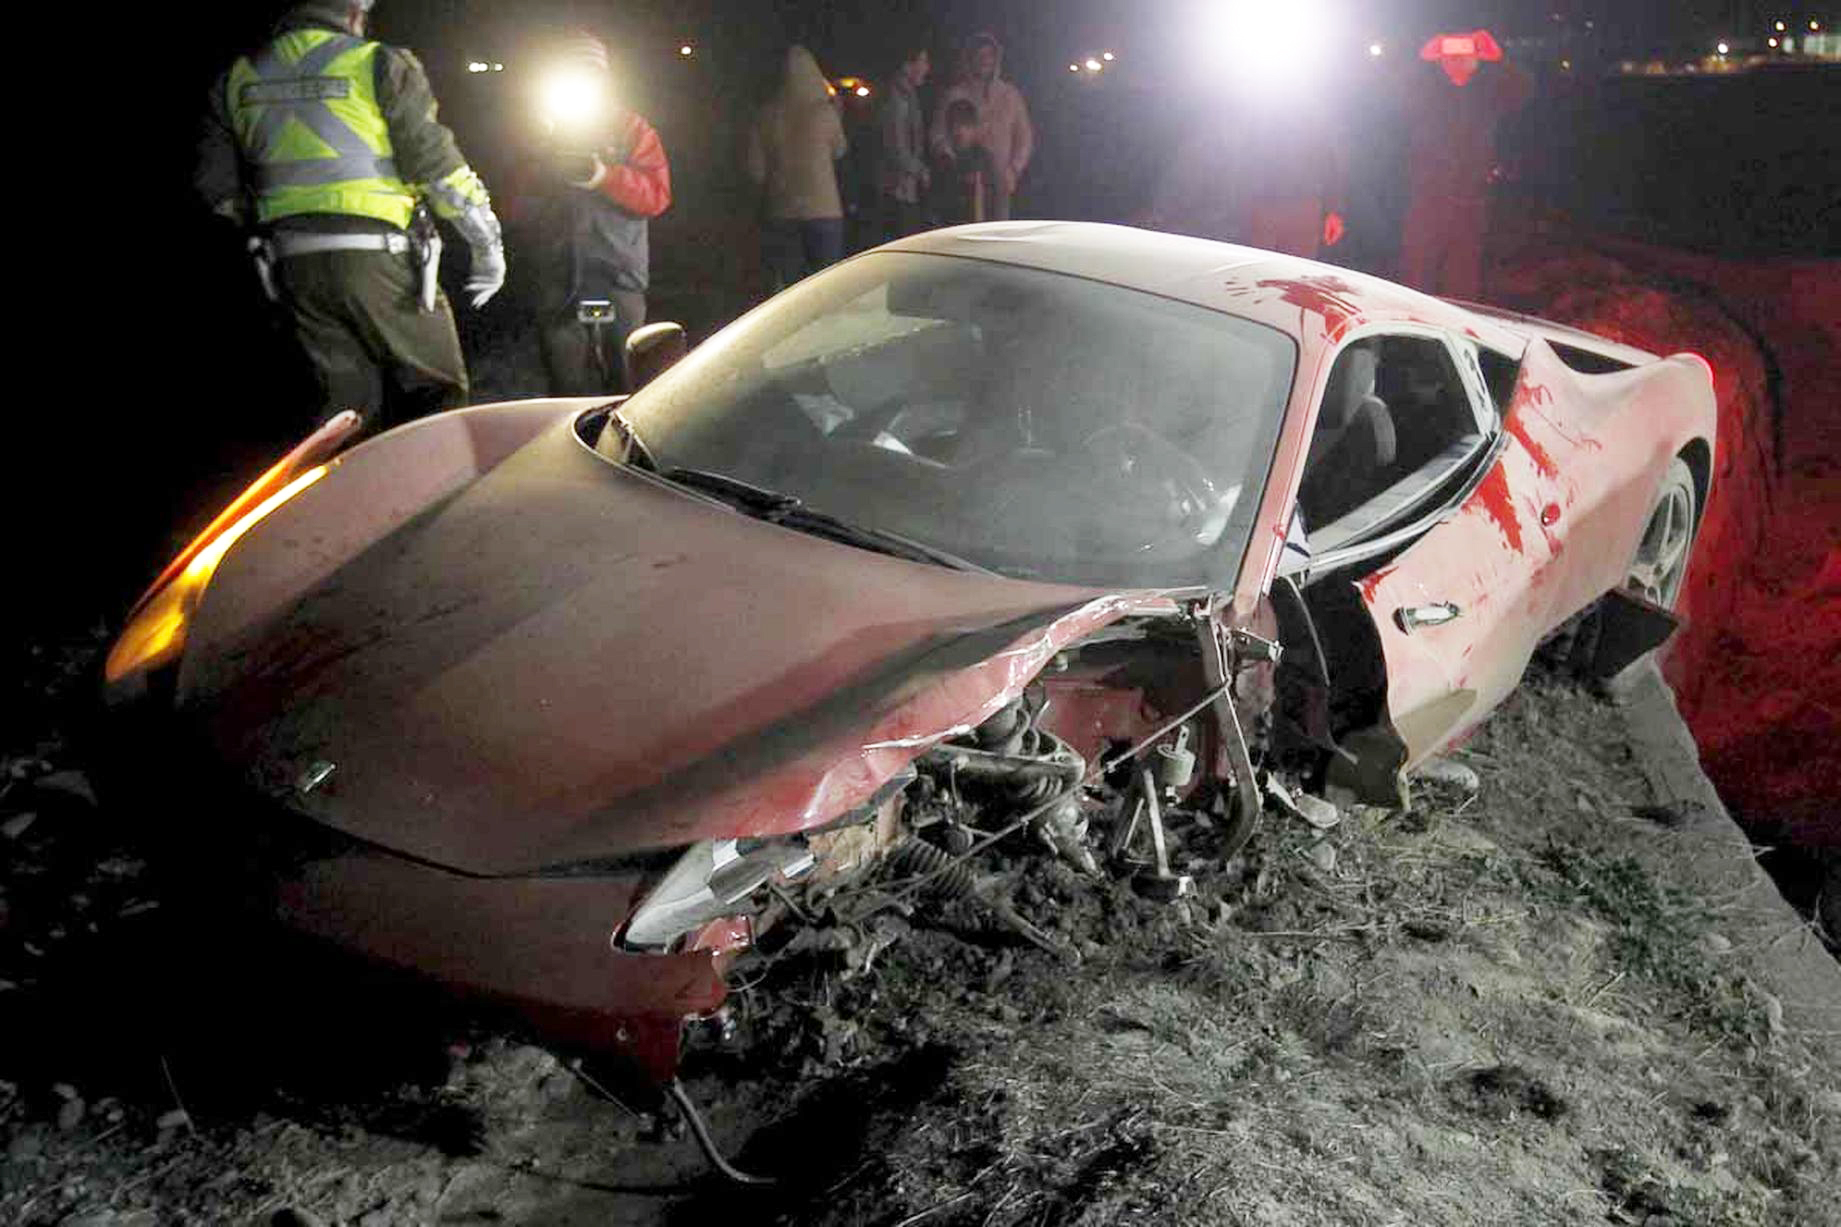 A-red-Ferrari-belonging-to-Arturo-Vidal-is-seen-after-a-car-crash-on-a-highway-south-of-Santiago